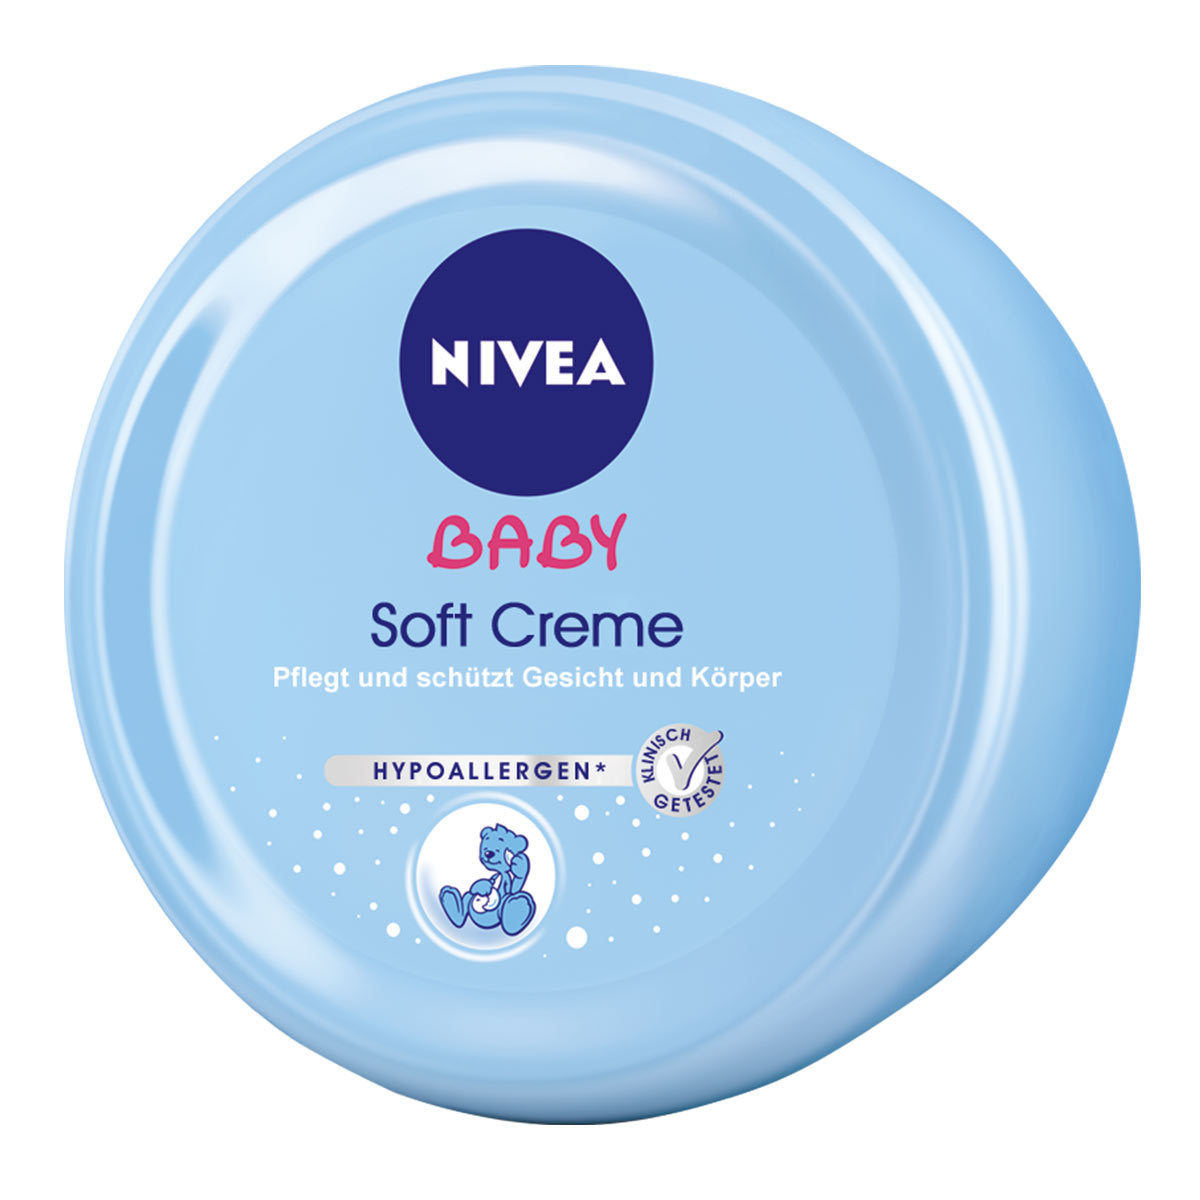 Primary image of Baby Soft Creme